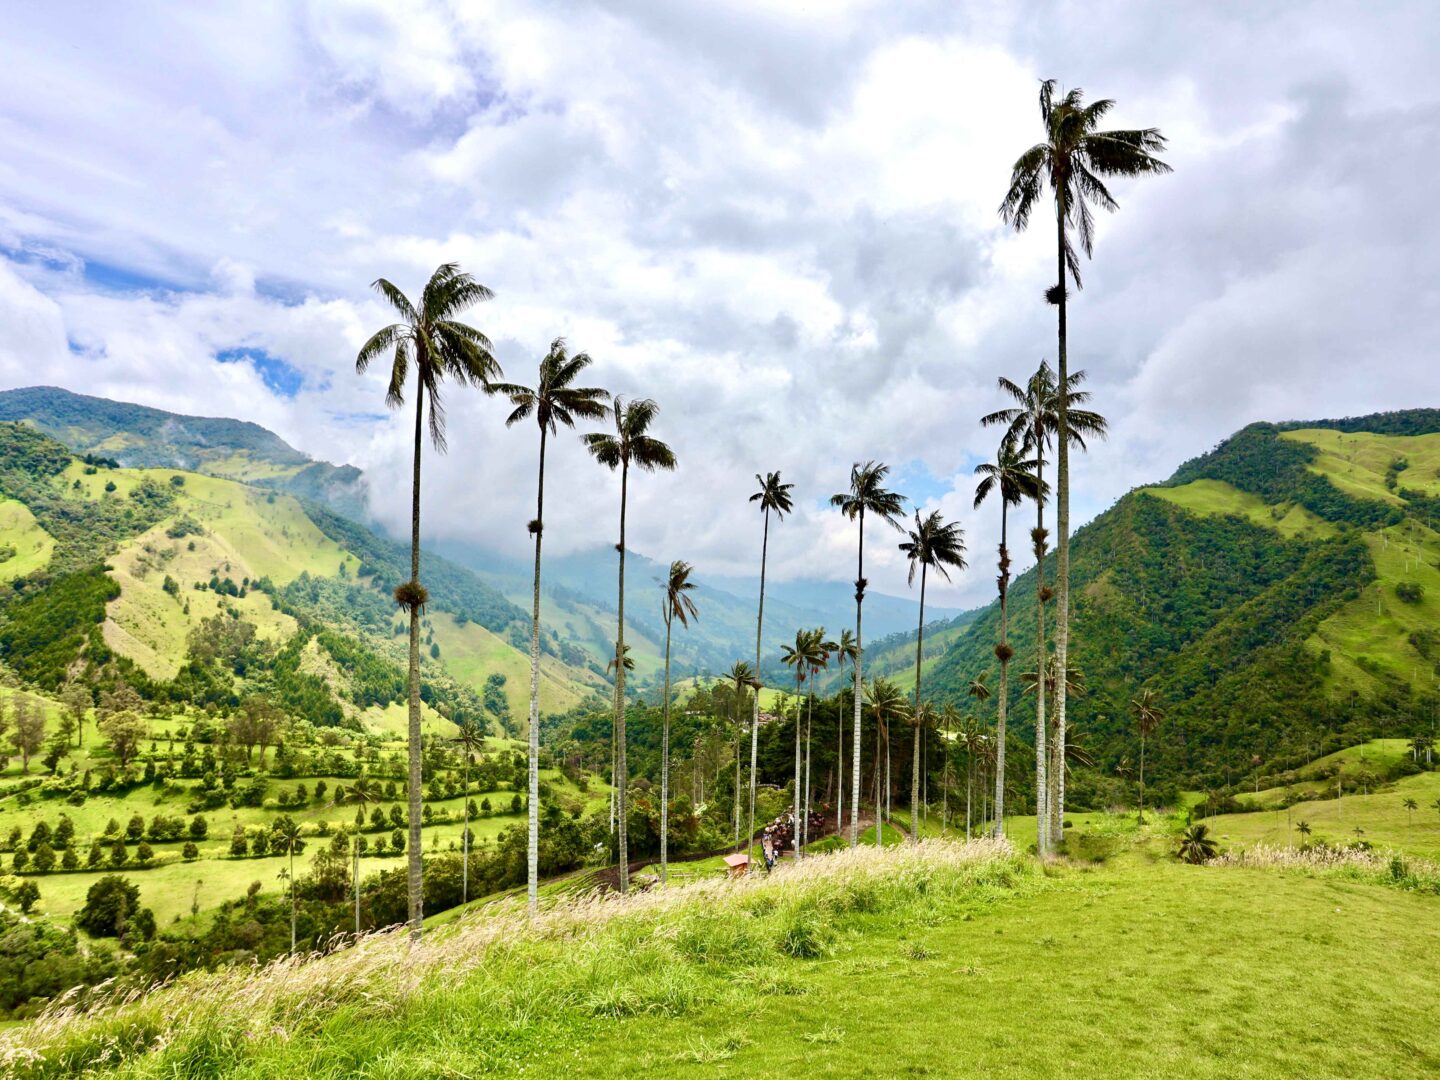 Cocora Valley in Armenia, Colombia